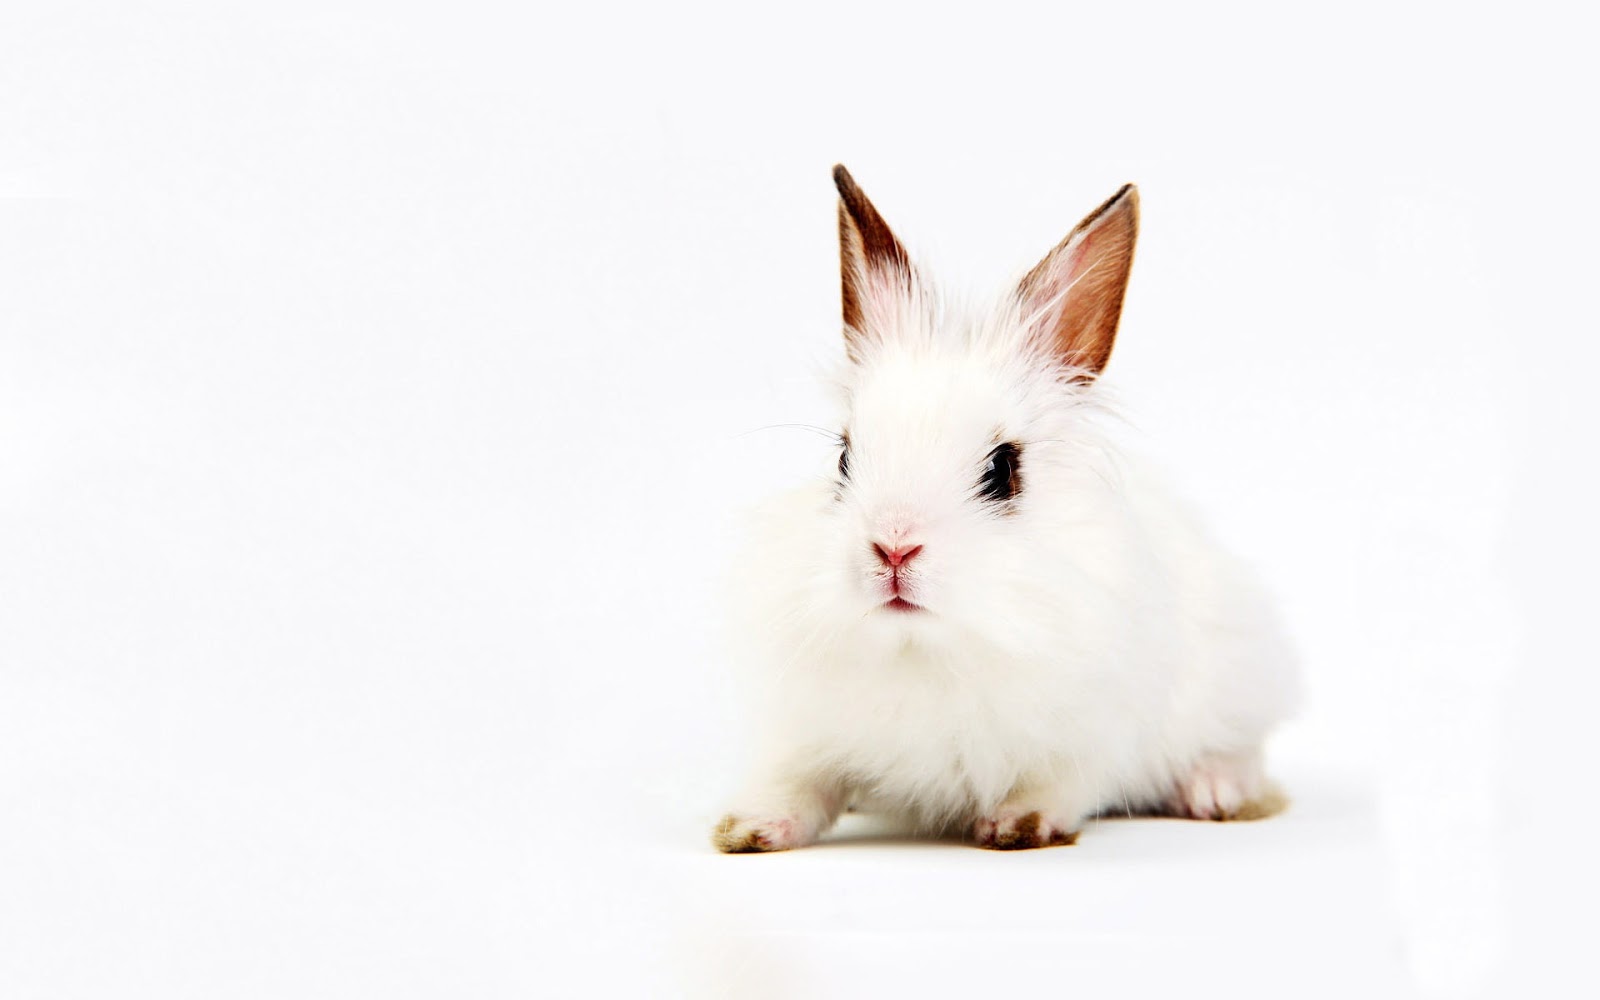 All About Animal Wildlife Cute White Rabbit HD Wallpaper